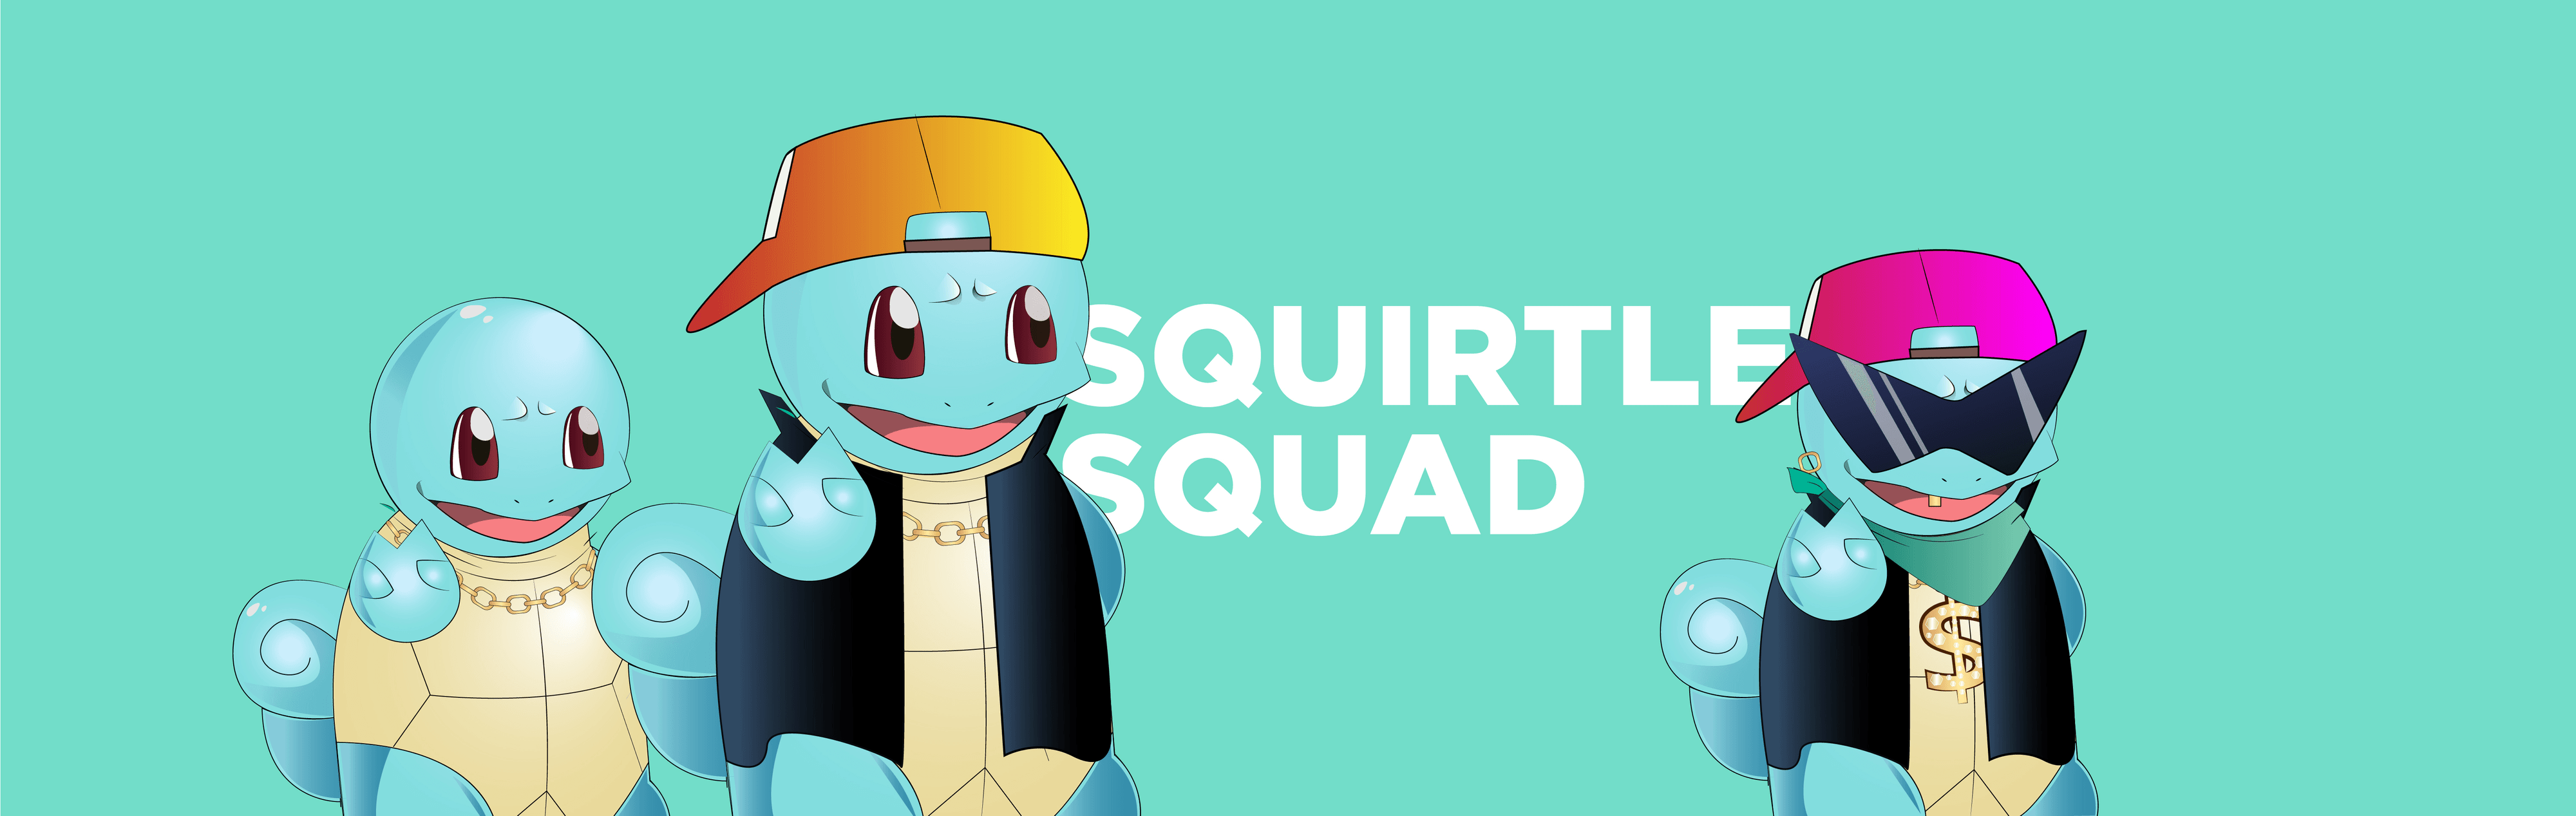 Squirtle_SQUAD_nft バナー